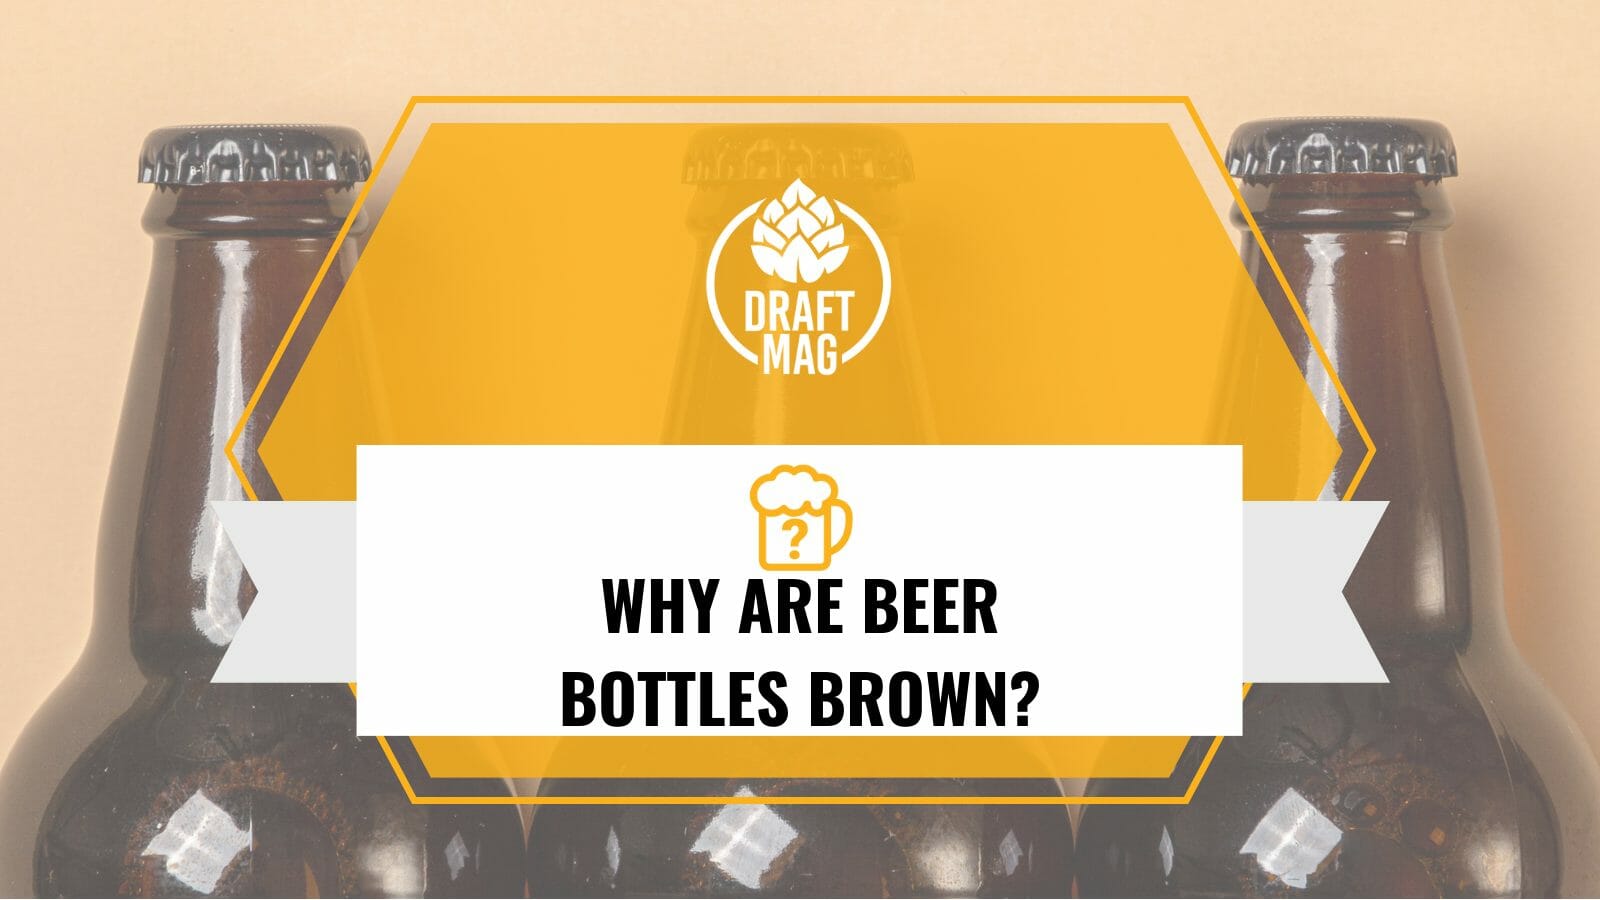 Why are beer bottles brown